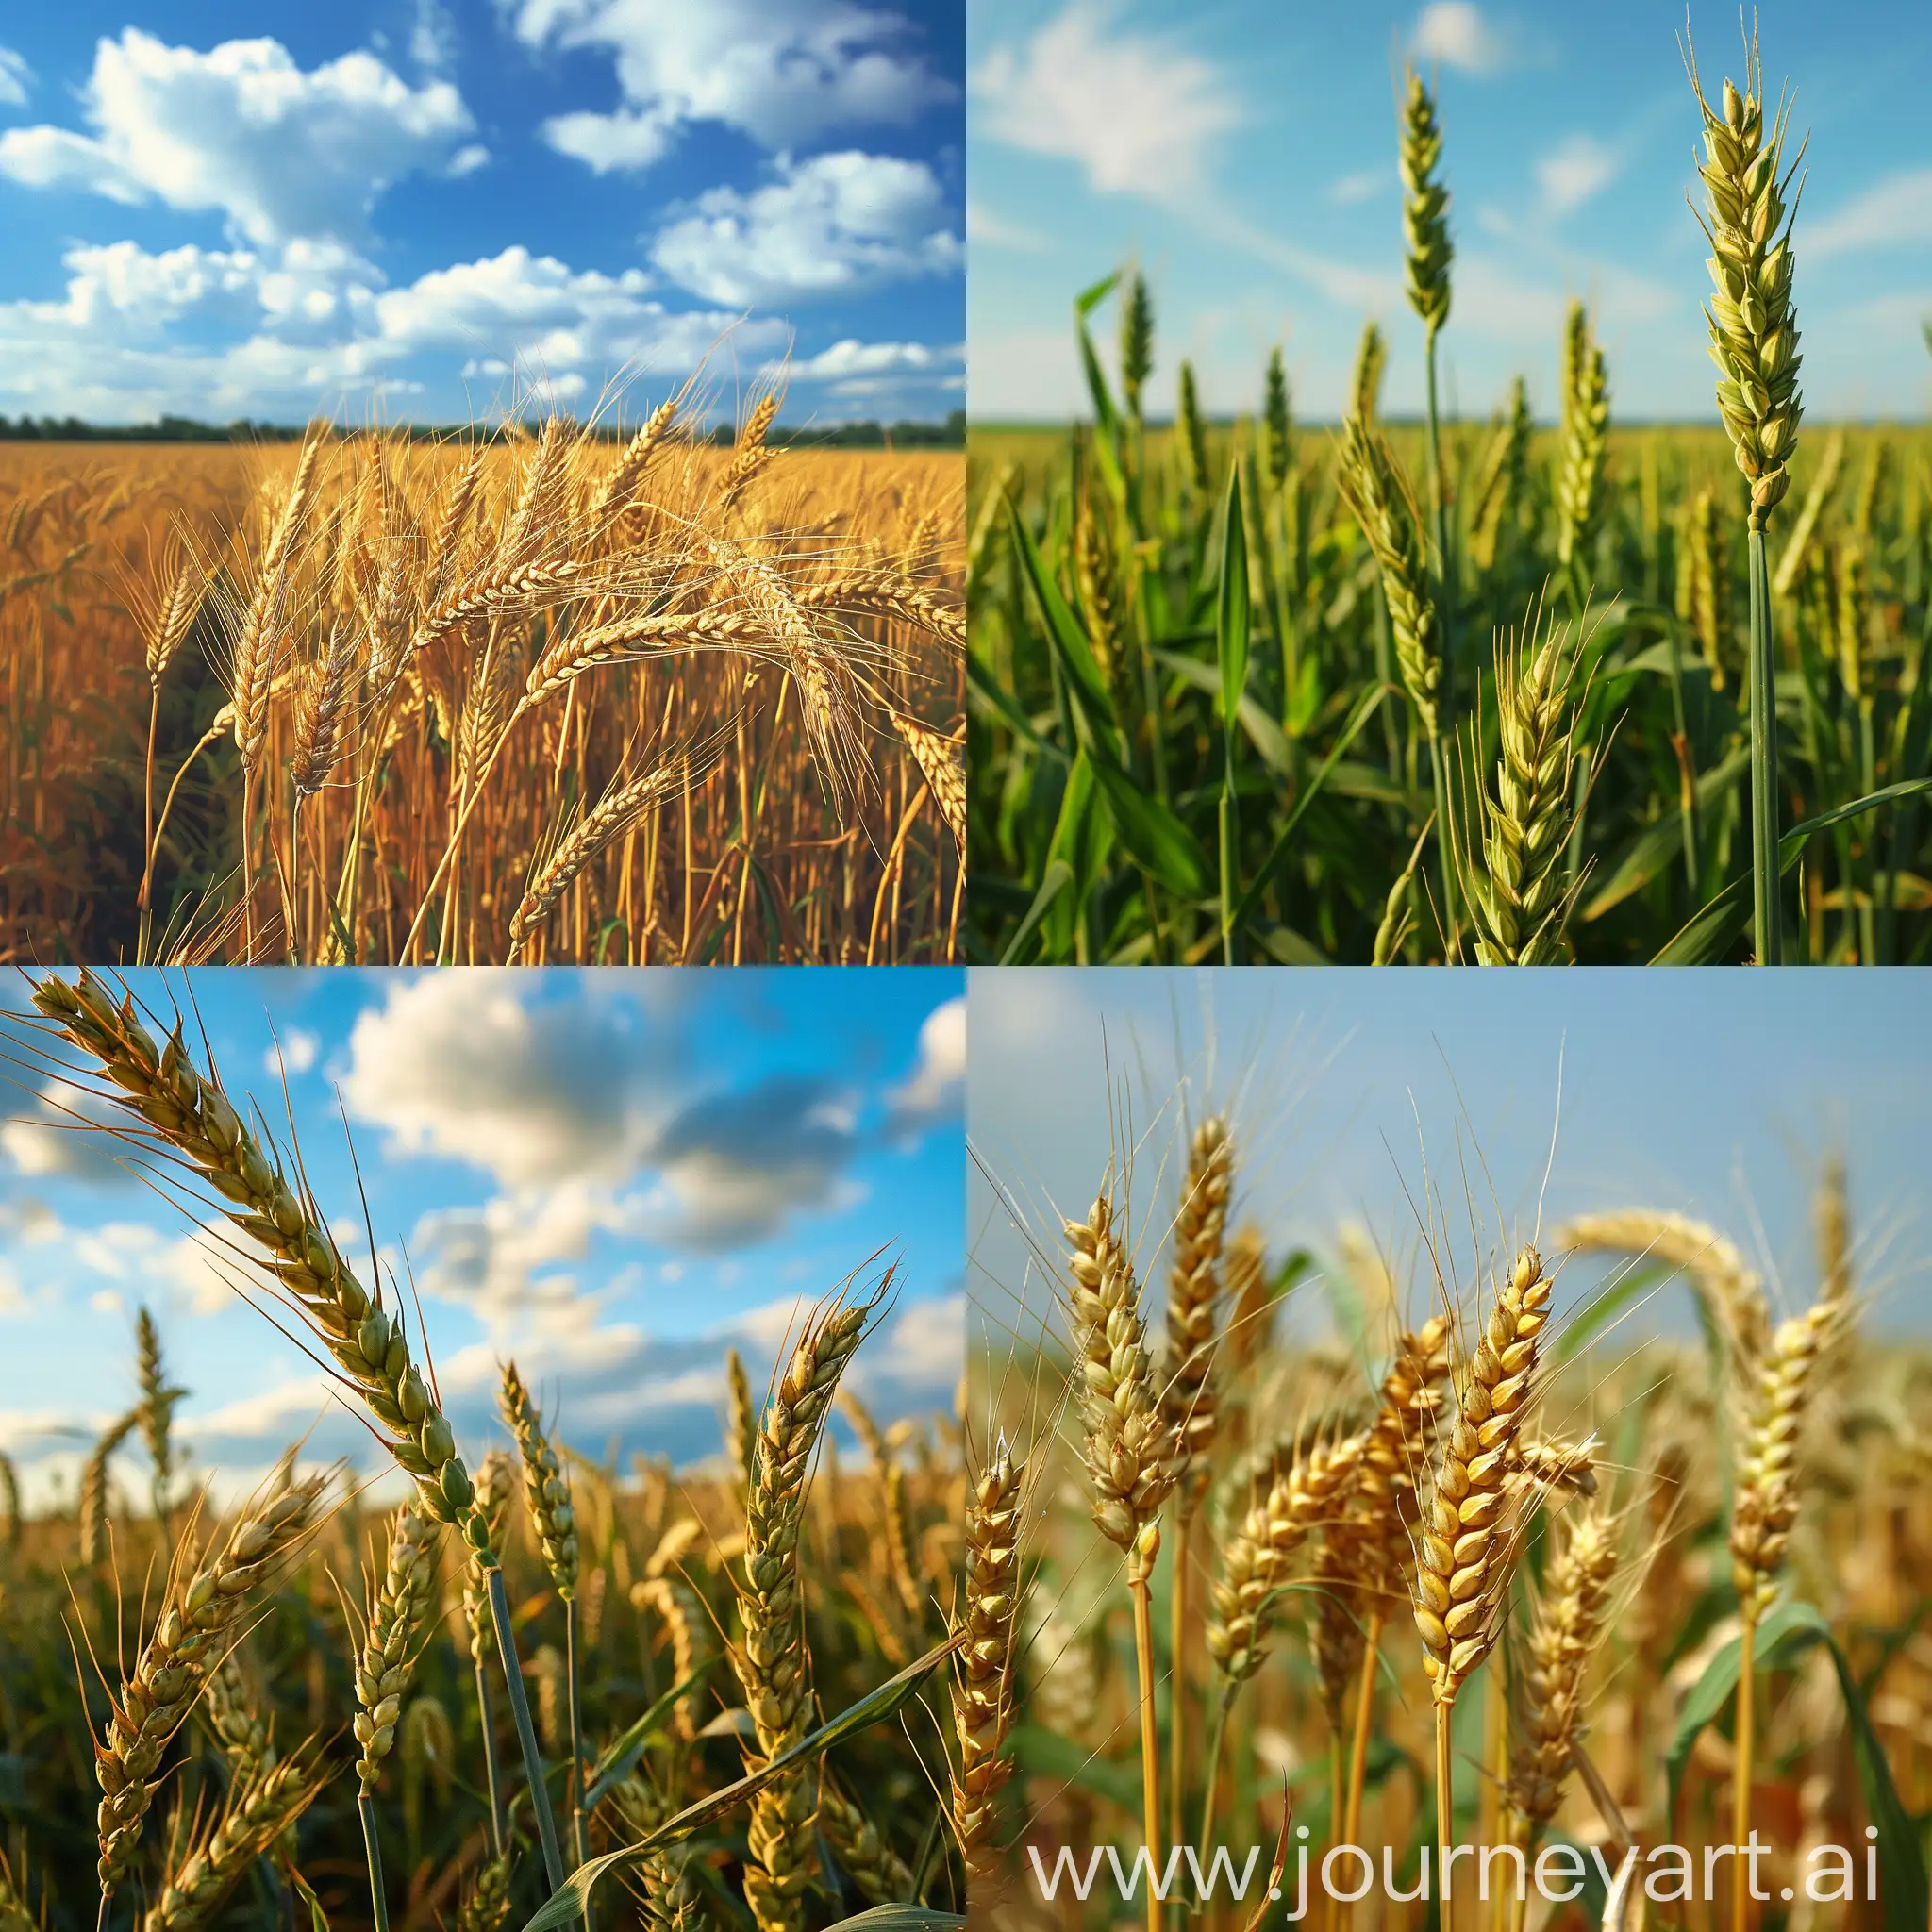 Bountiful-Crop-Production-Growth-in-Europe